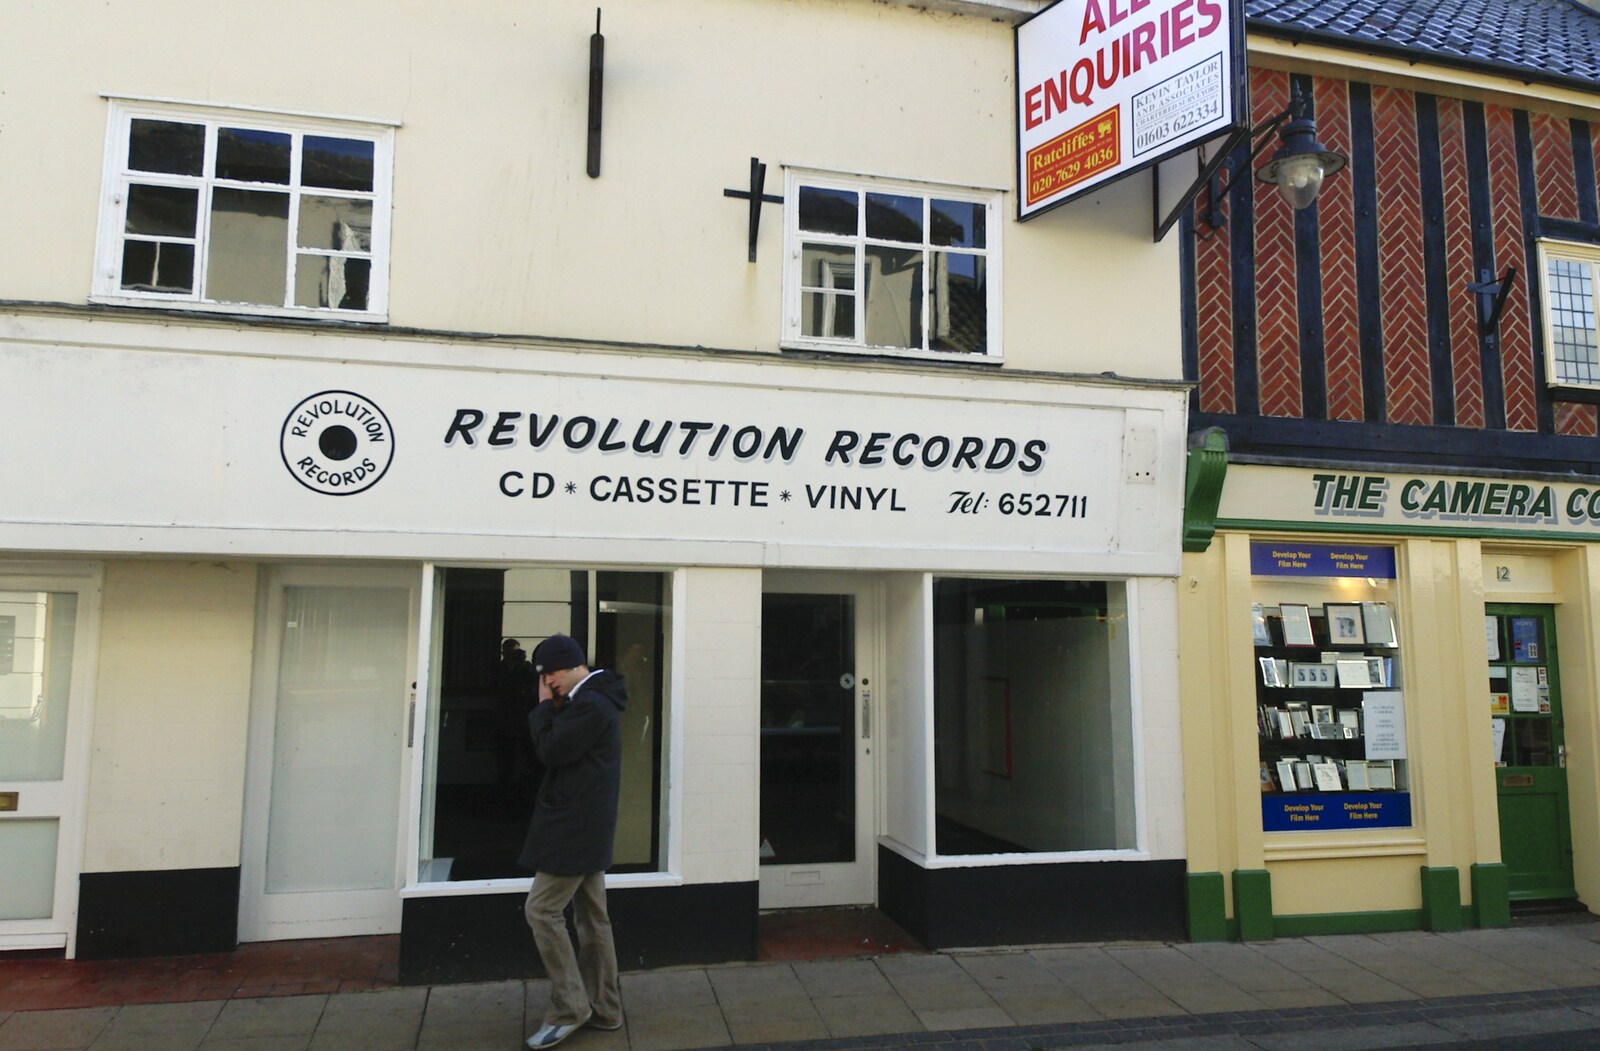 Revolution Records is closed. A sad day from Wrecked Cars, A Night Out and Stick Game in the Cherry Tree, Cambridge and Yaxley, Suffolk- 24th February 2006